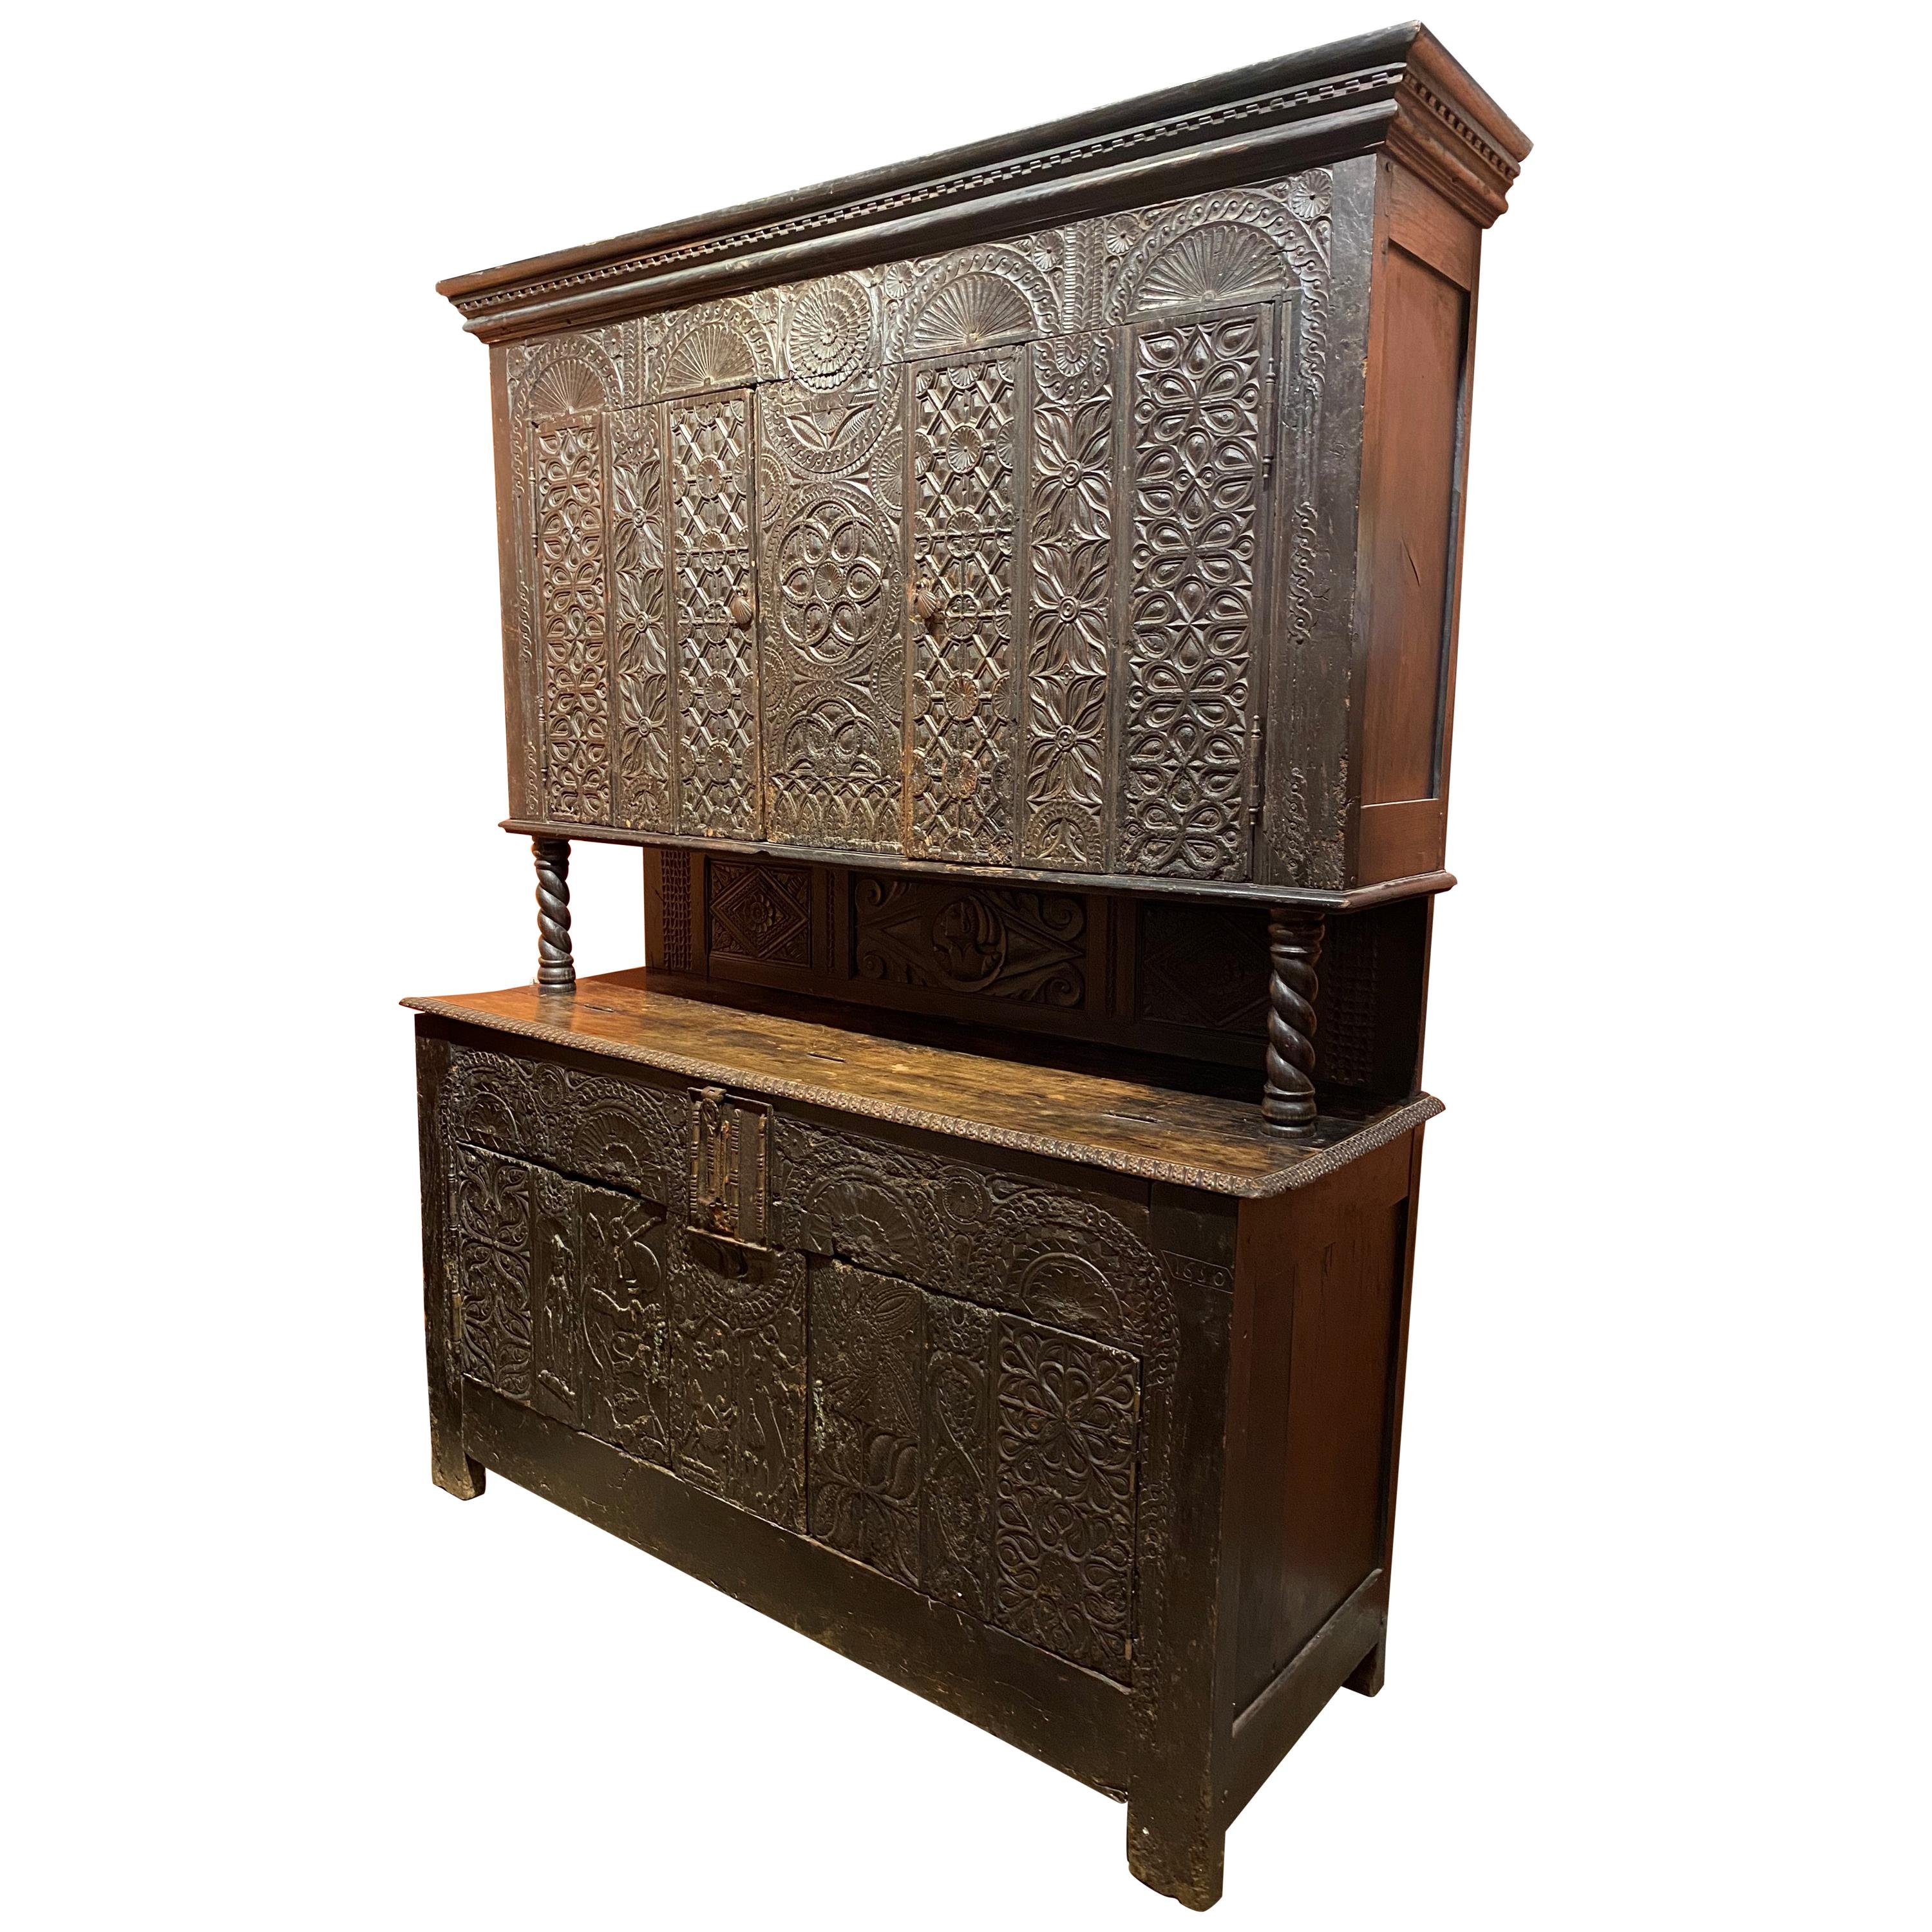 Restored 17th C Continental Two Part Cupboard with Exceptional Carving